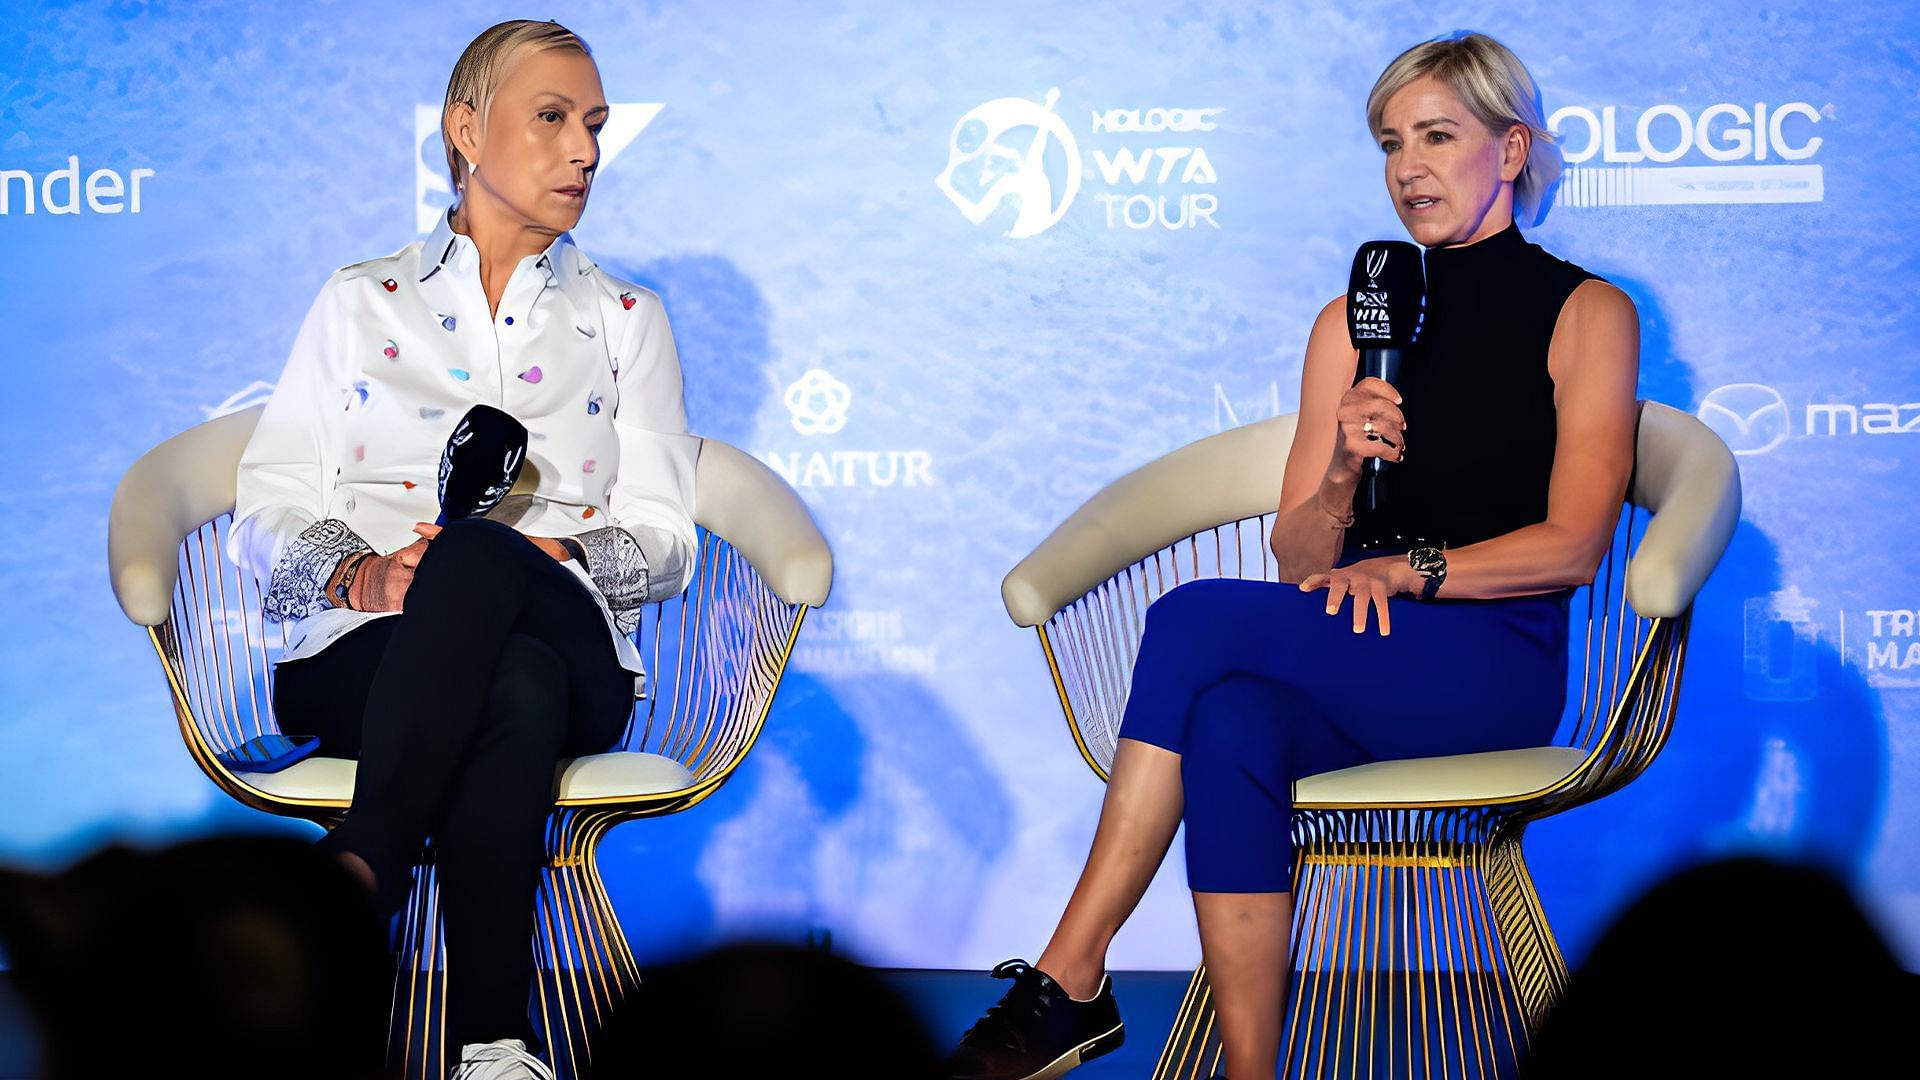 Martina Navratilova and Chris Evert have written a scathing letter to WTA CEO Steve Simon opposing the WTA Finals